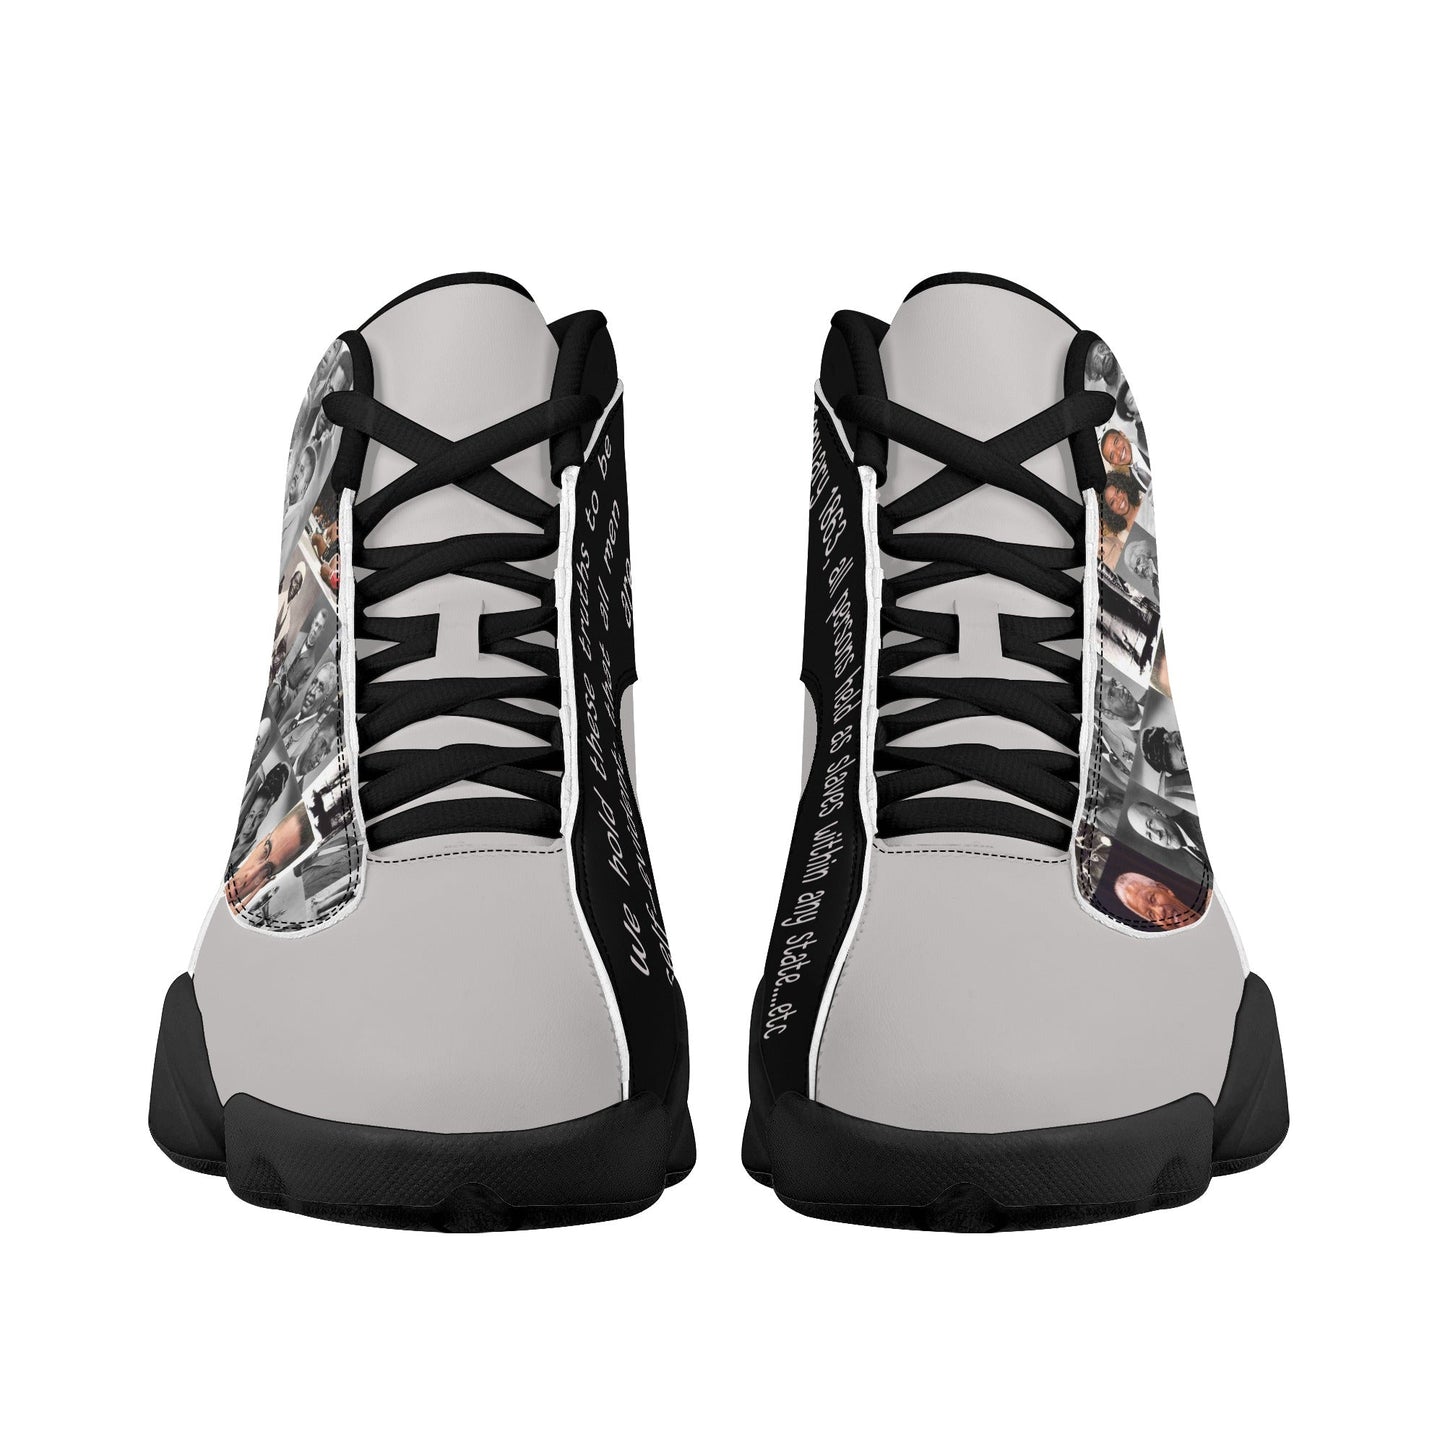 T4x We Are All Equal Men's Basketball Shoes - T4x Quadruple Love